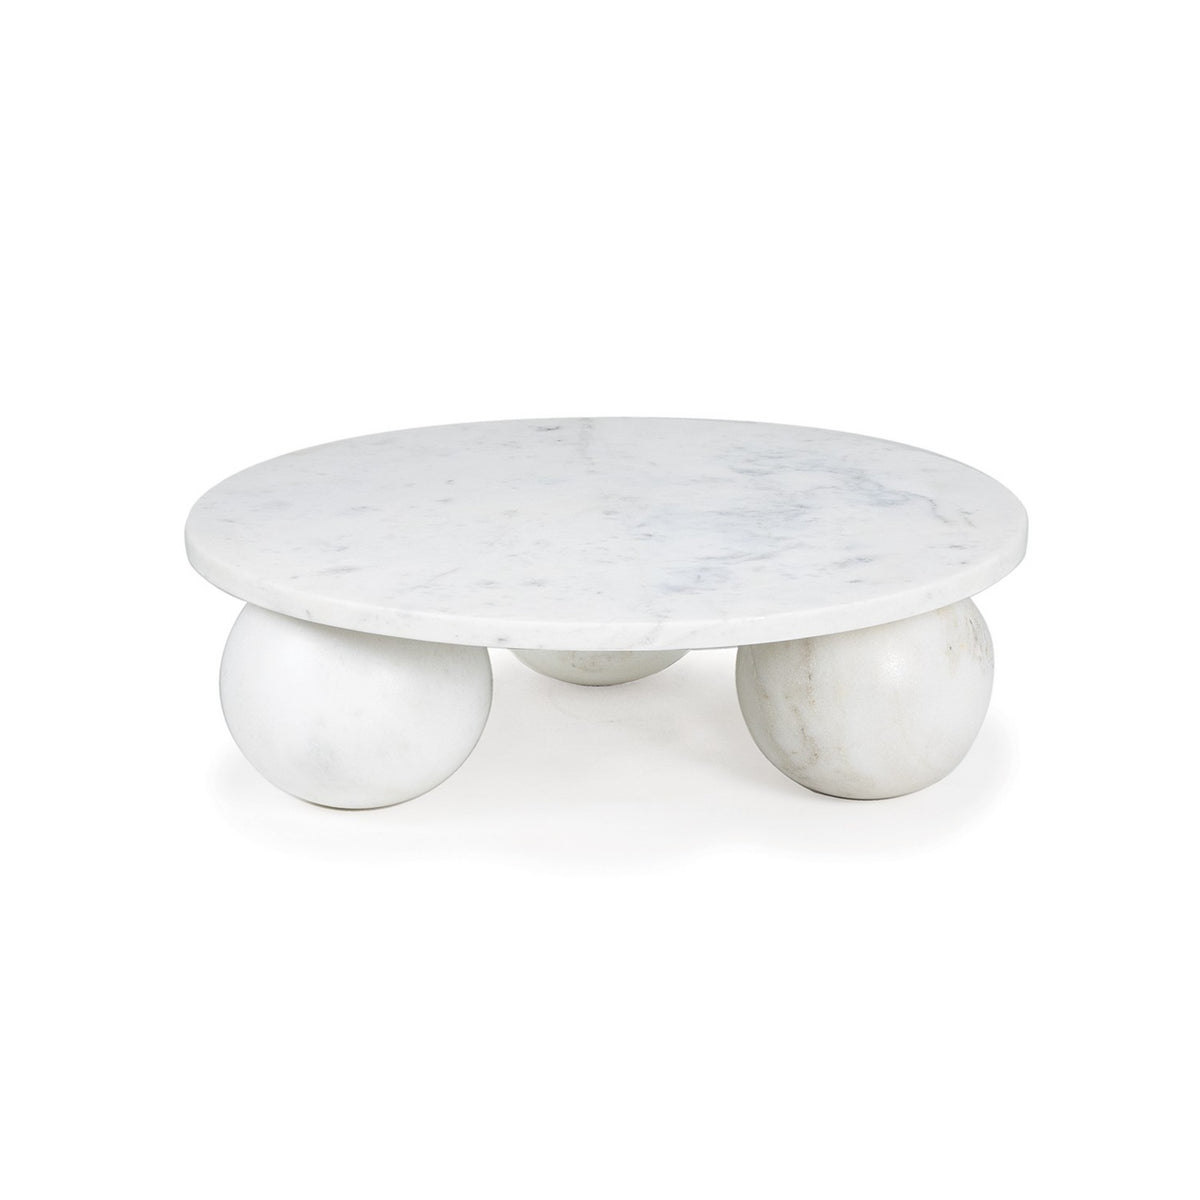 Regina Andrew Marble Plate from the Marlow collection in White finish